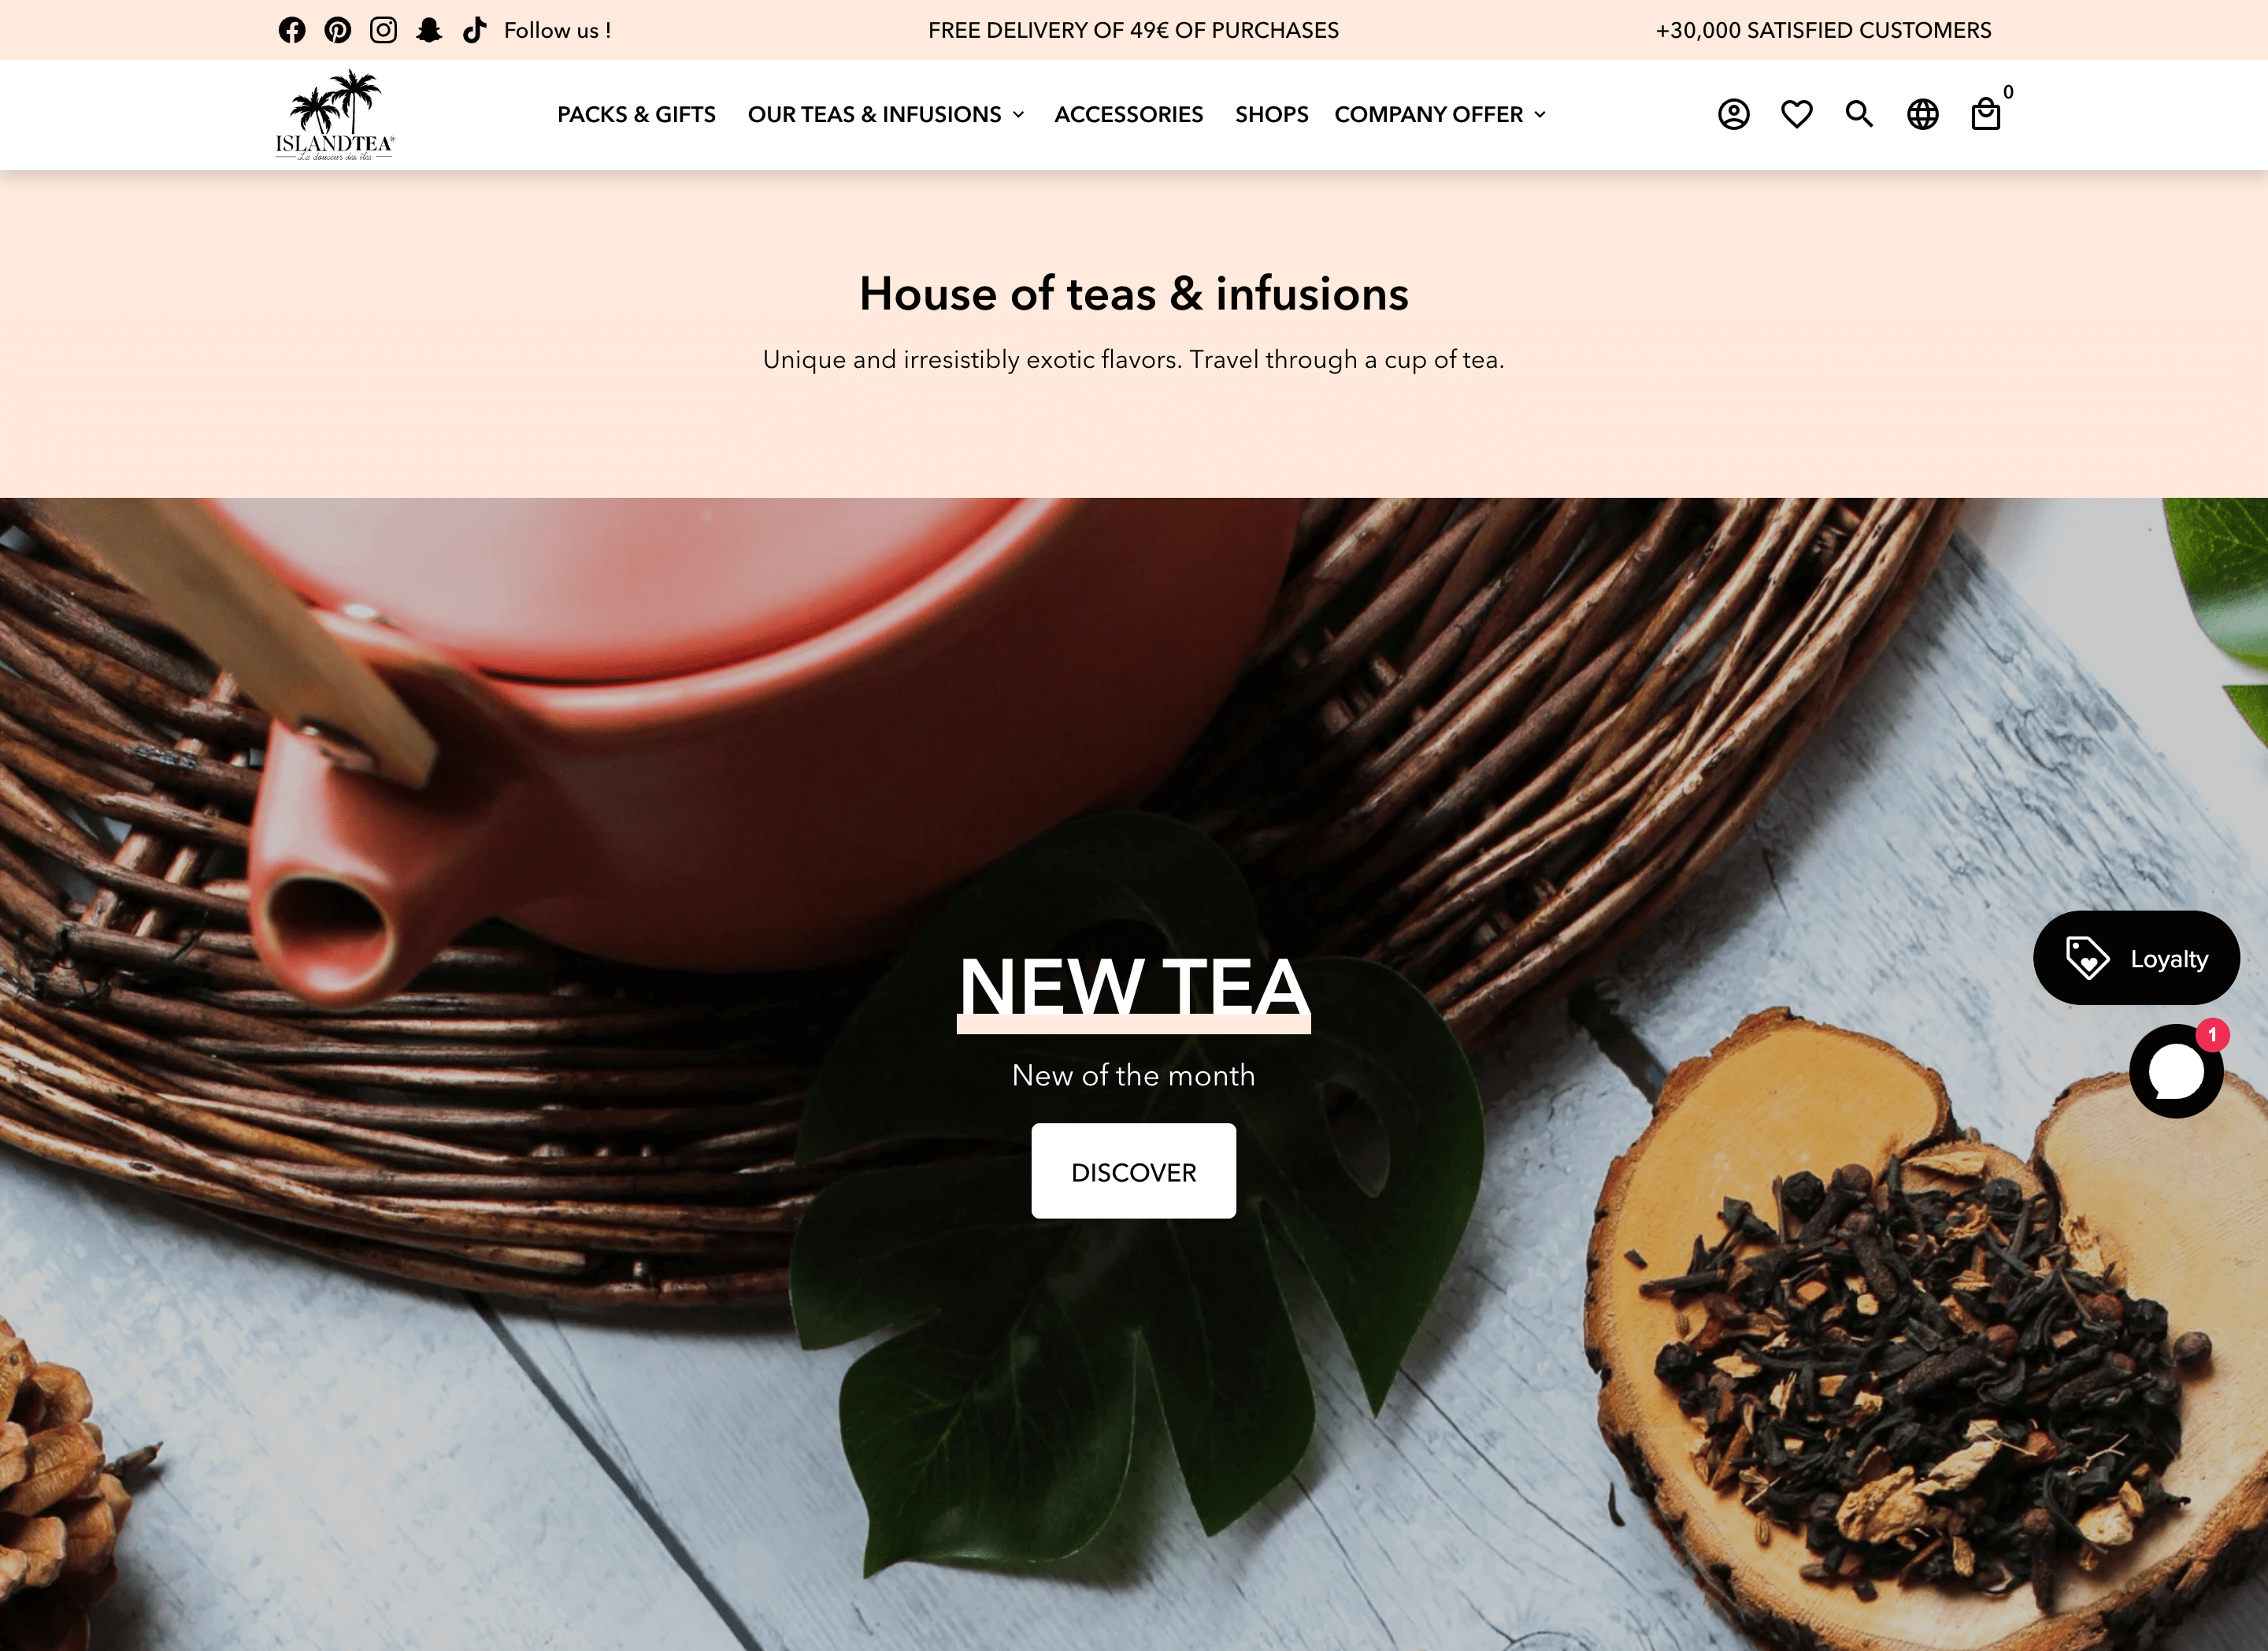 Women Ecommerce Entrepreneurs–A screenshot of Island Tea’s homepage. There is an image of a teapot, some wooden coasters, and various tea blends. 